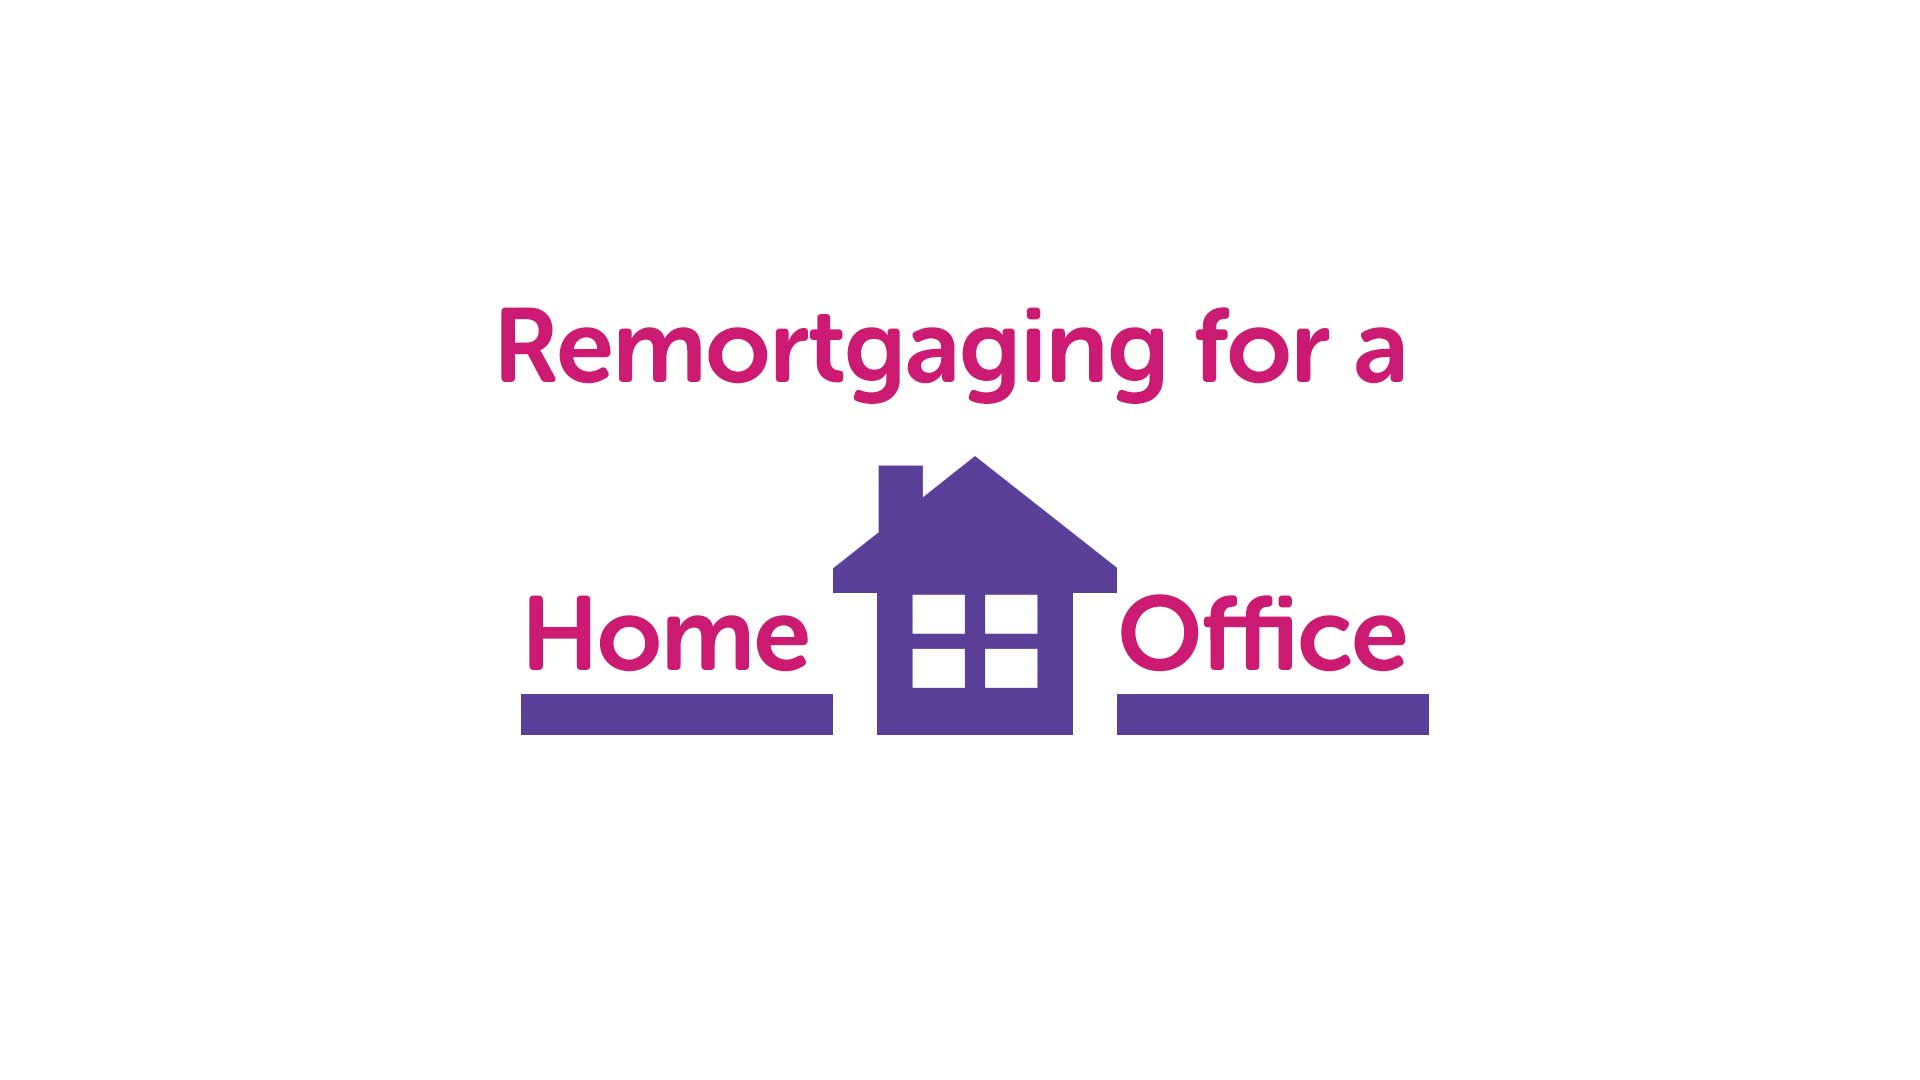 Remortgage for a Home Office in Hull